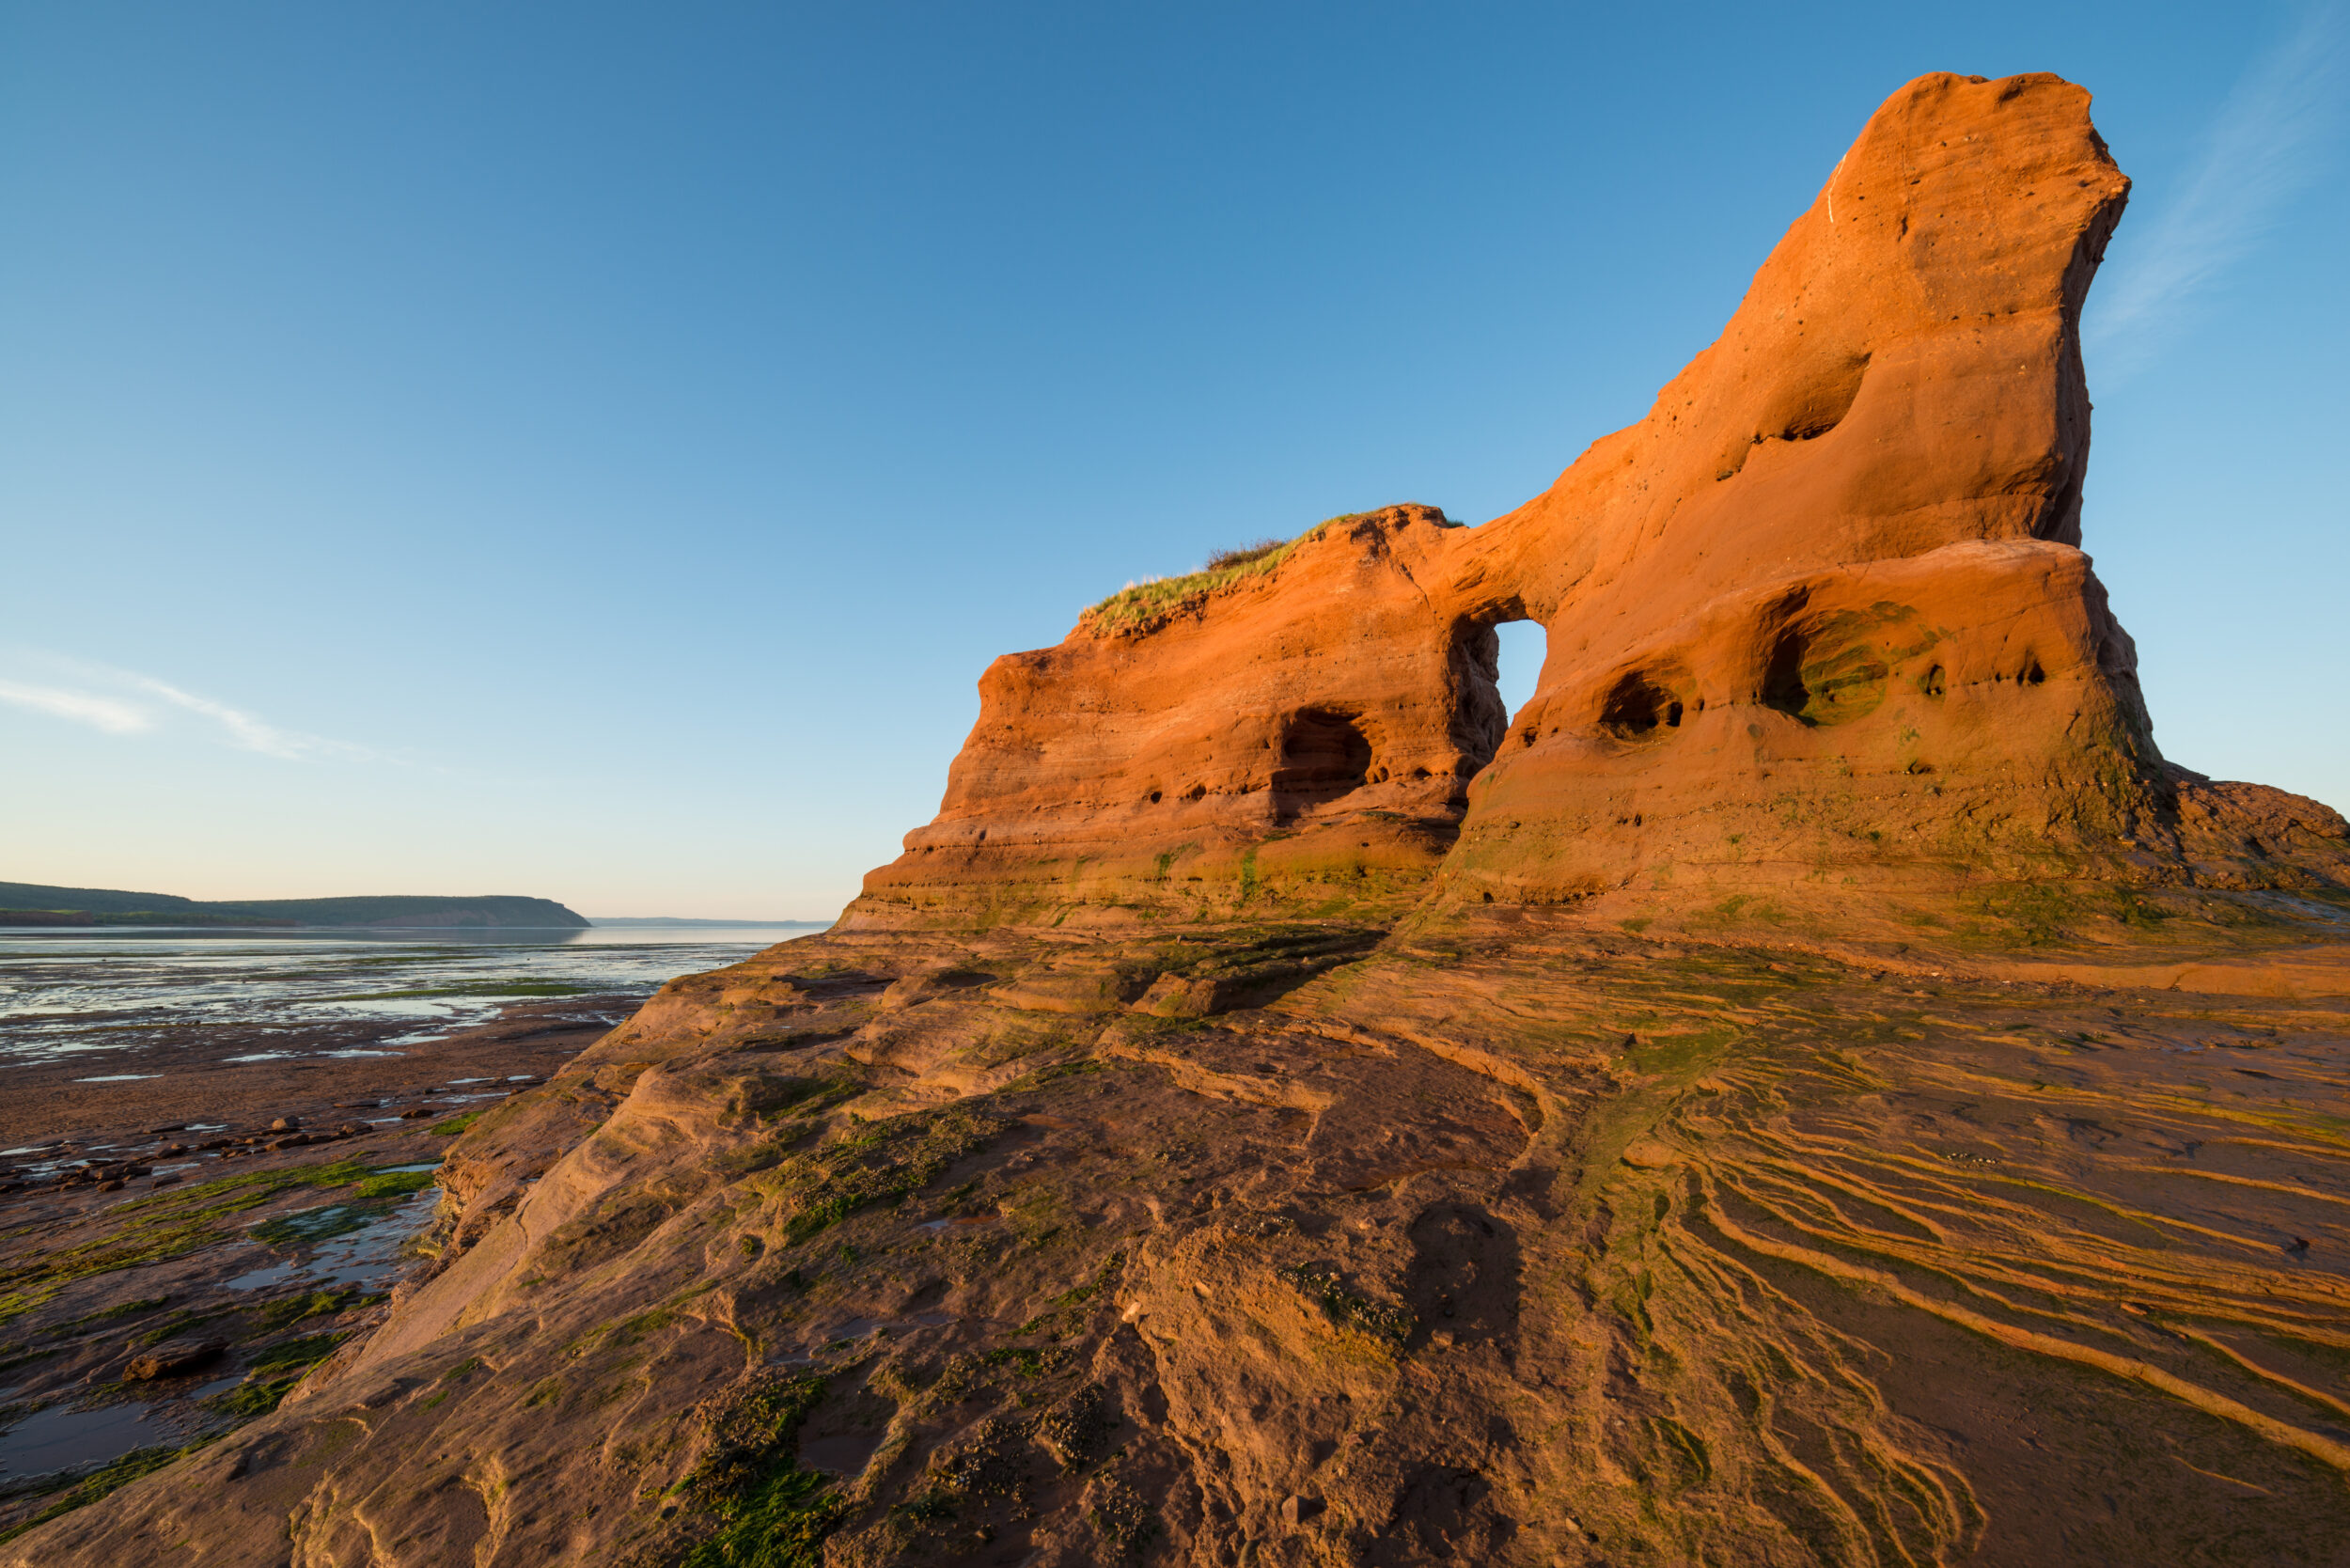 A view at sunset of a rock formation at low tide on the Bay of Fundy, Nova Scotia.